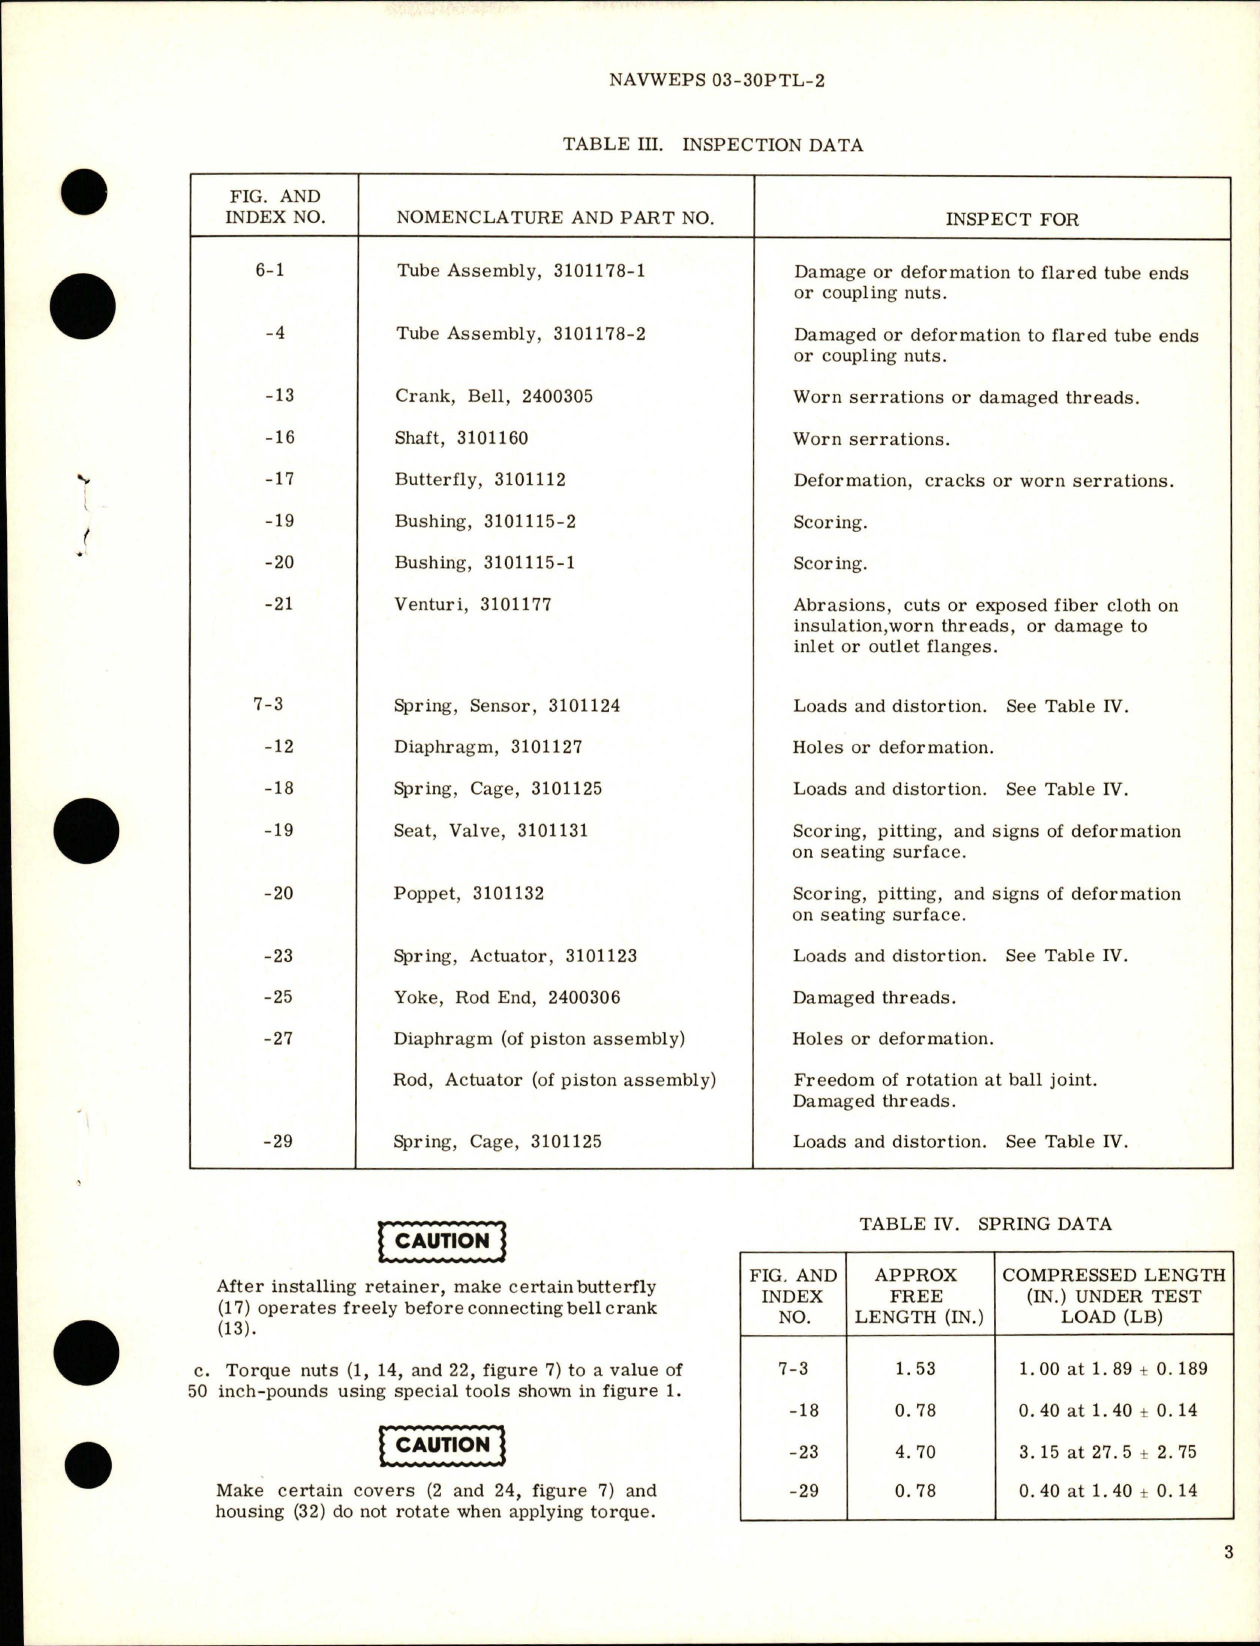 Sample page 5 from AirCorps Library document: Overhaul Instructions with Parts Breakdown for Airflow Limiting Valve - Part 31011-1